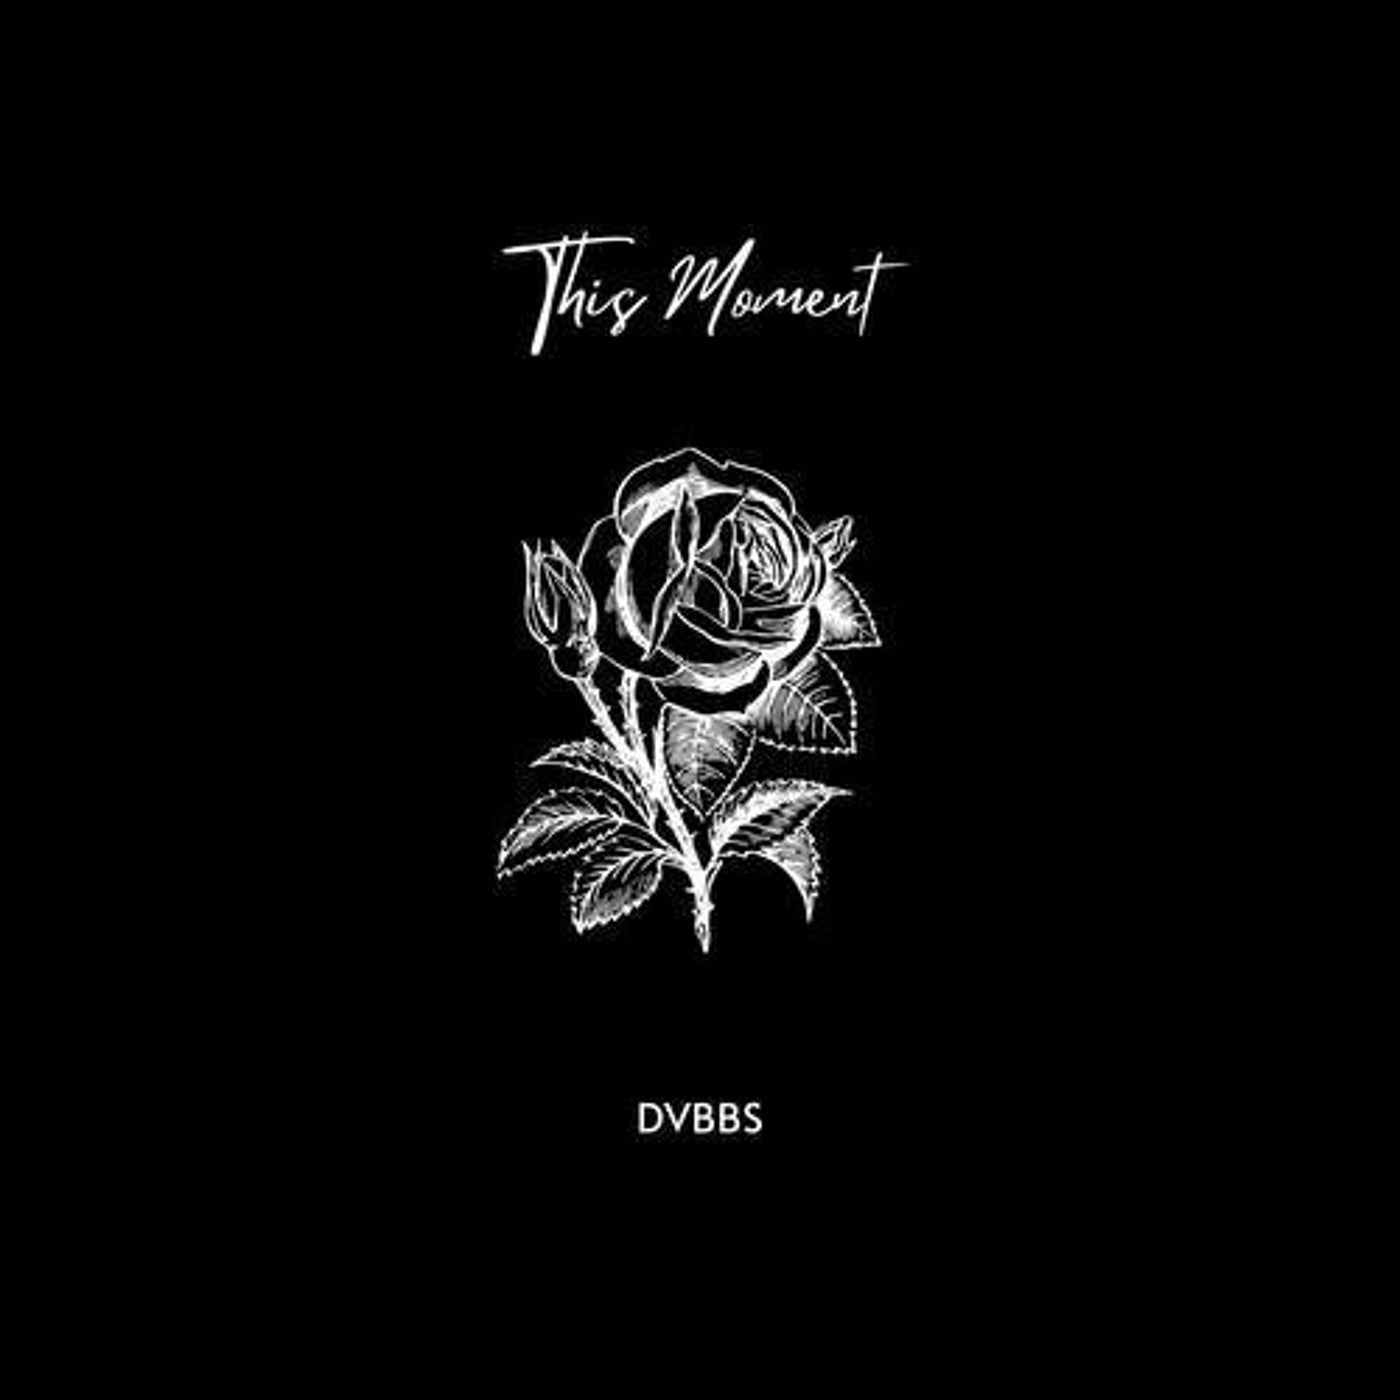 This Moment (Extended Mix)